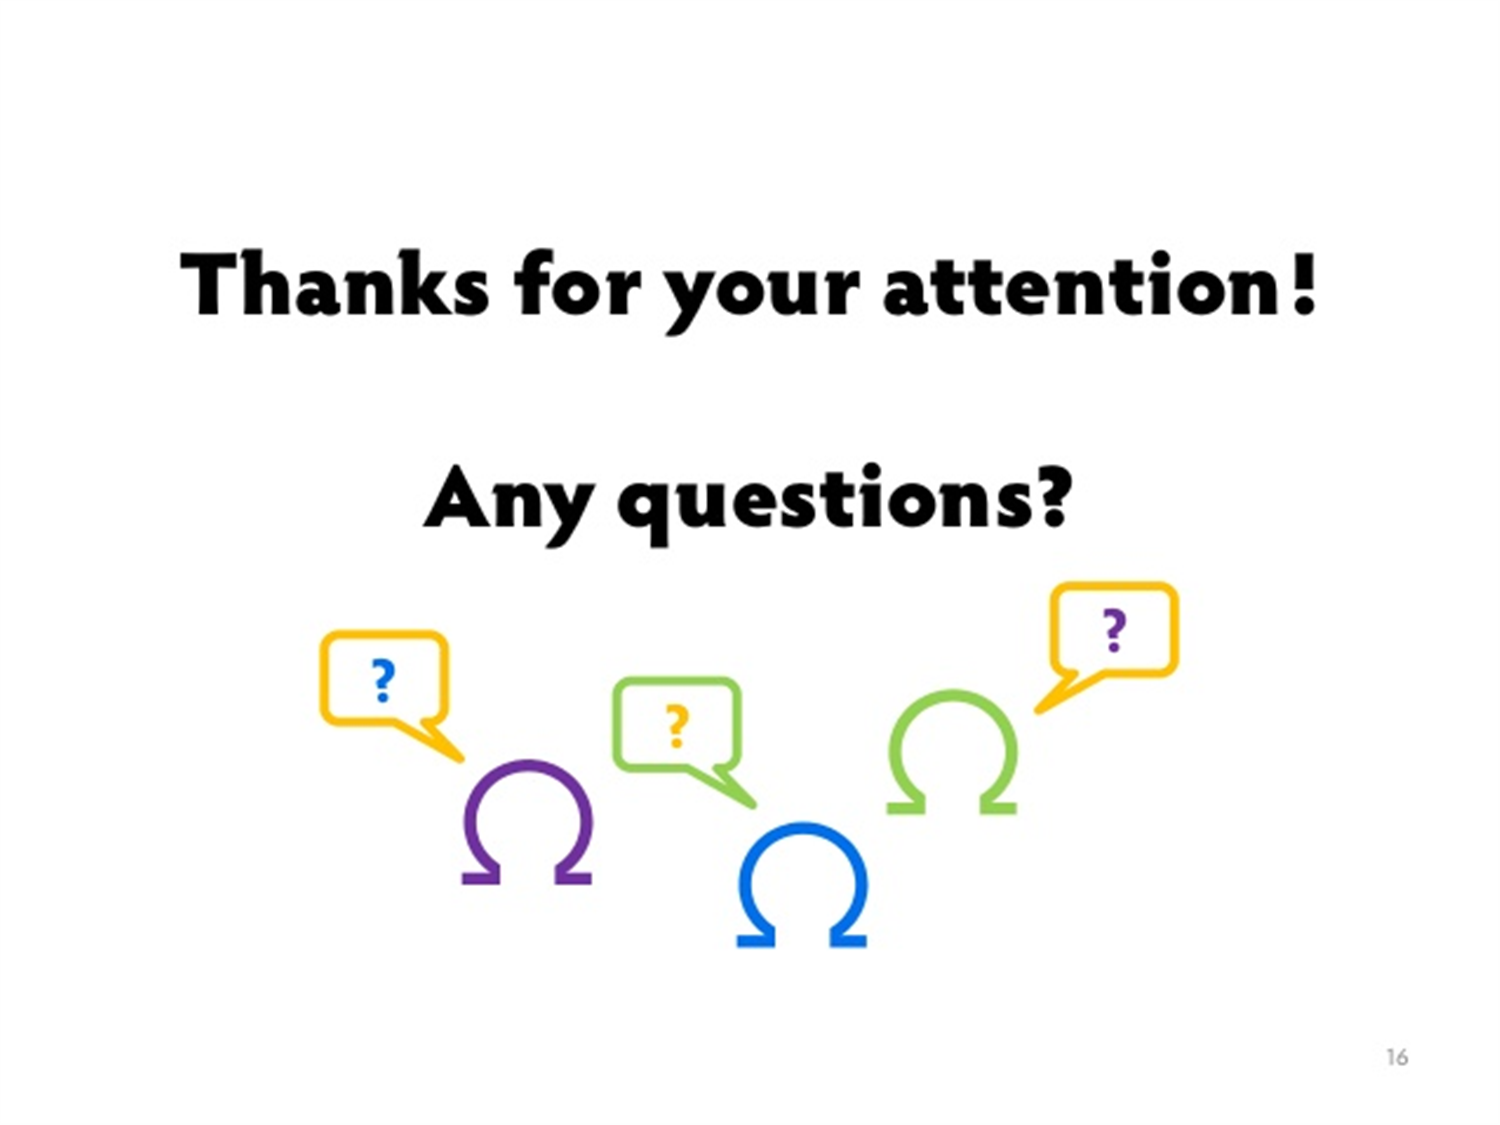 Give your attention. Thank you for your attention картинки для презентации. Thanks for your attention any questions. Thank you for attention any questions. Thanks for attention no questions please.